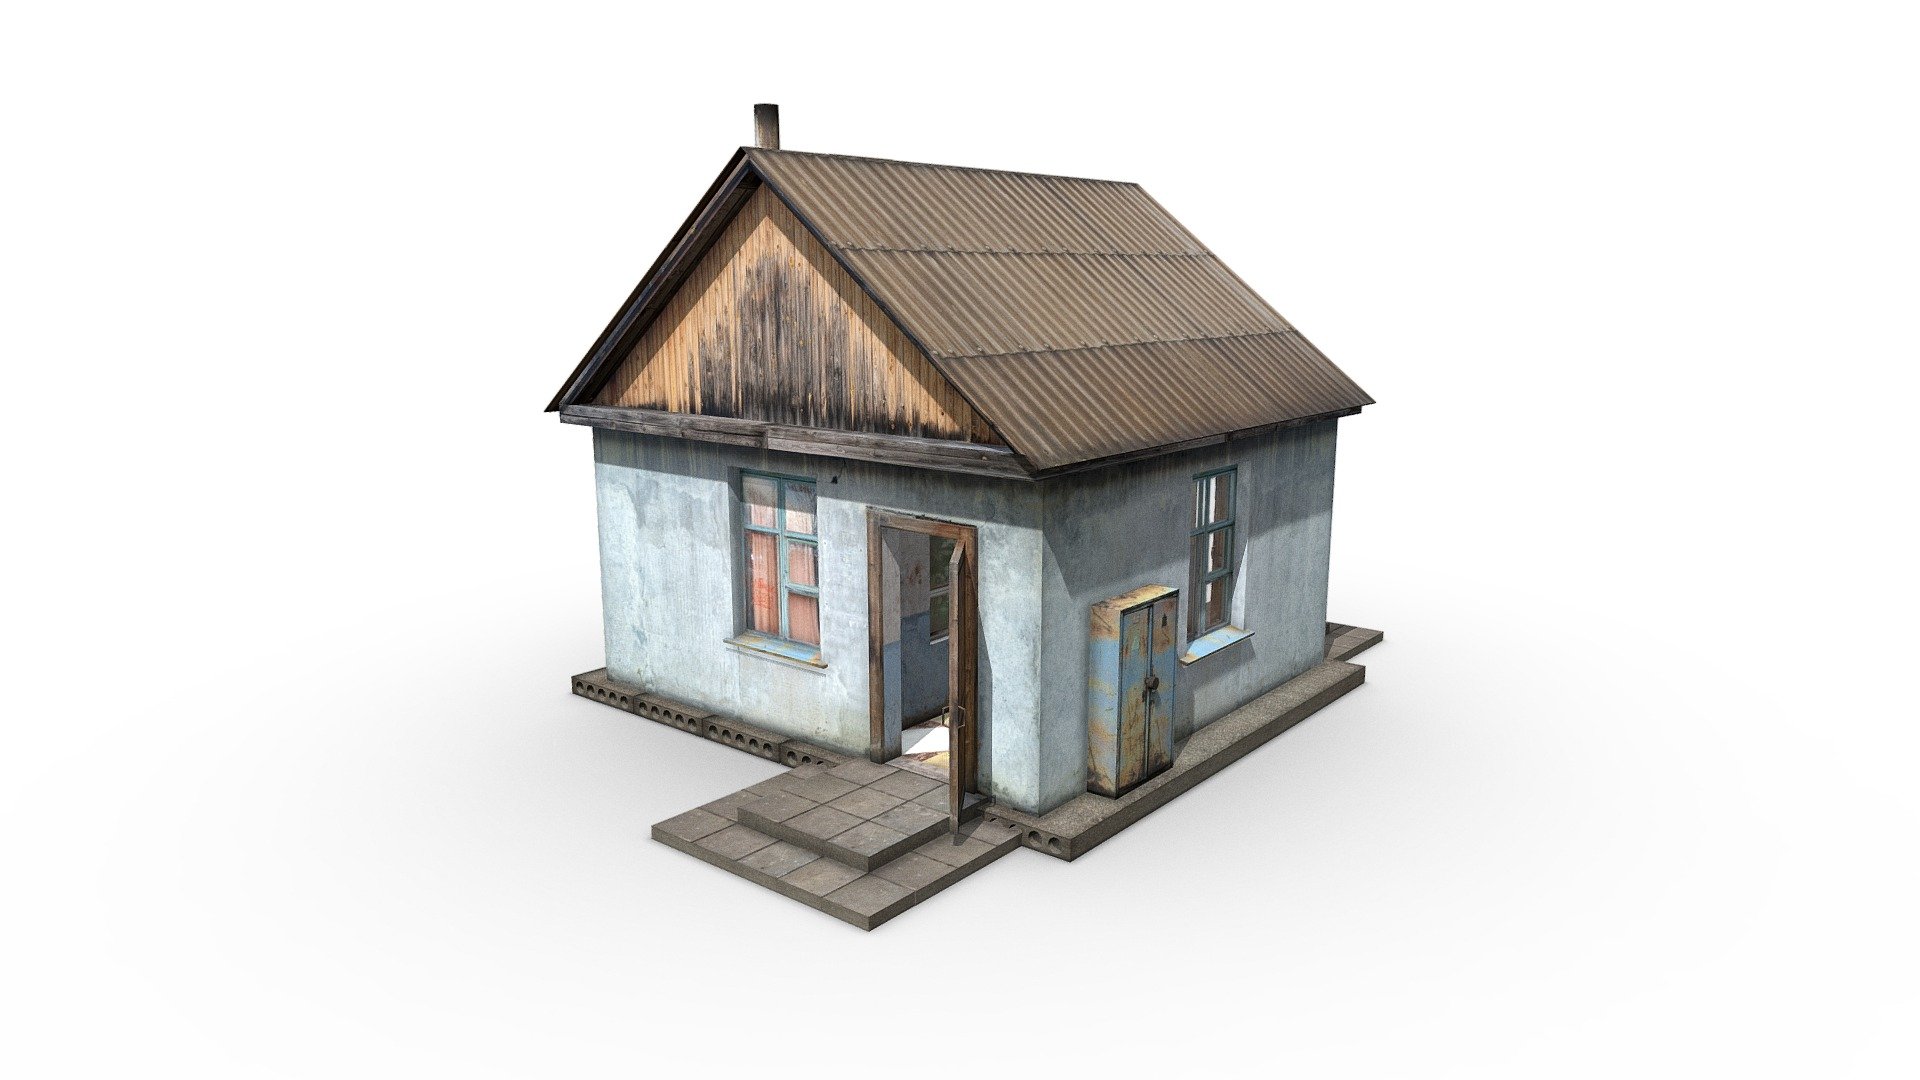 This is an old Soviet checkpoint that exists in factories and plants. Inside there is an office with a window through which the guard checks the documents, as well as an additional room for a warehouse / archive or a rest room. Low poly 3D model of the Russian environment from Loginovsky Denis (denlog). This and my other models were created in 3ds max version 2017. Textures included are also created from mi own photos and free images from the Internet. My group is in Contact https://vk.com/club159607022 - Old Soviet checkpoint - 3D model by Denis Loginovskiy (@denlog2) 3d model